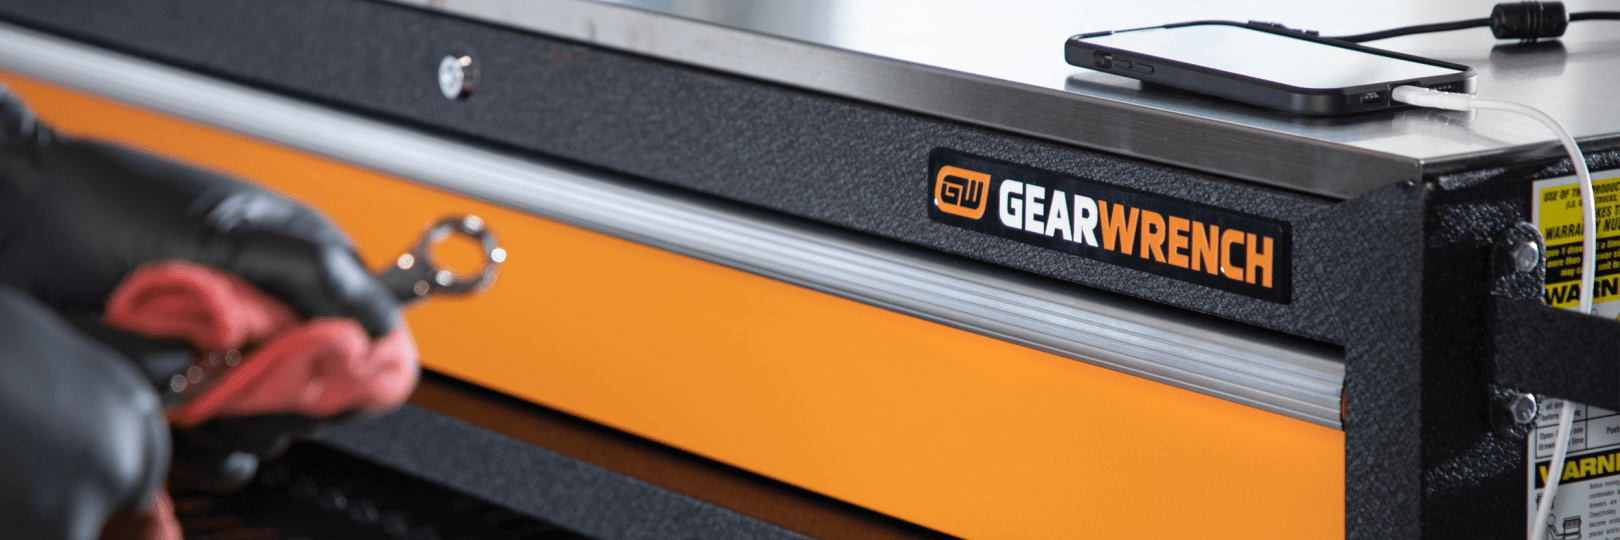 GEARWRENCH GSX Cabinet with drawer open